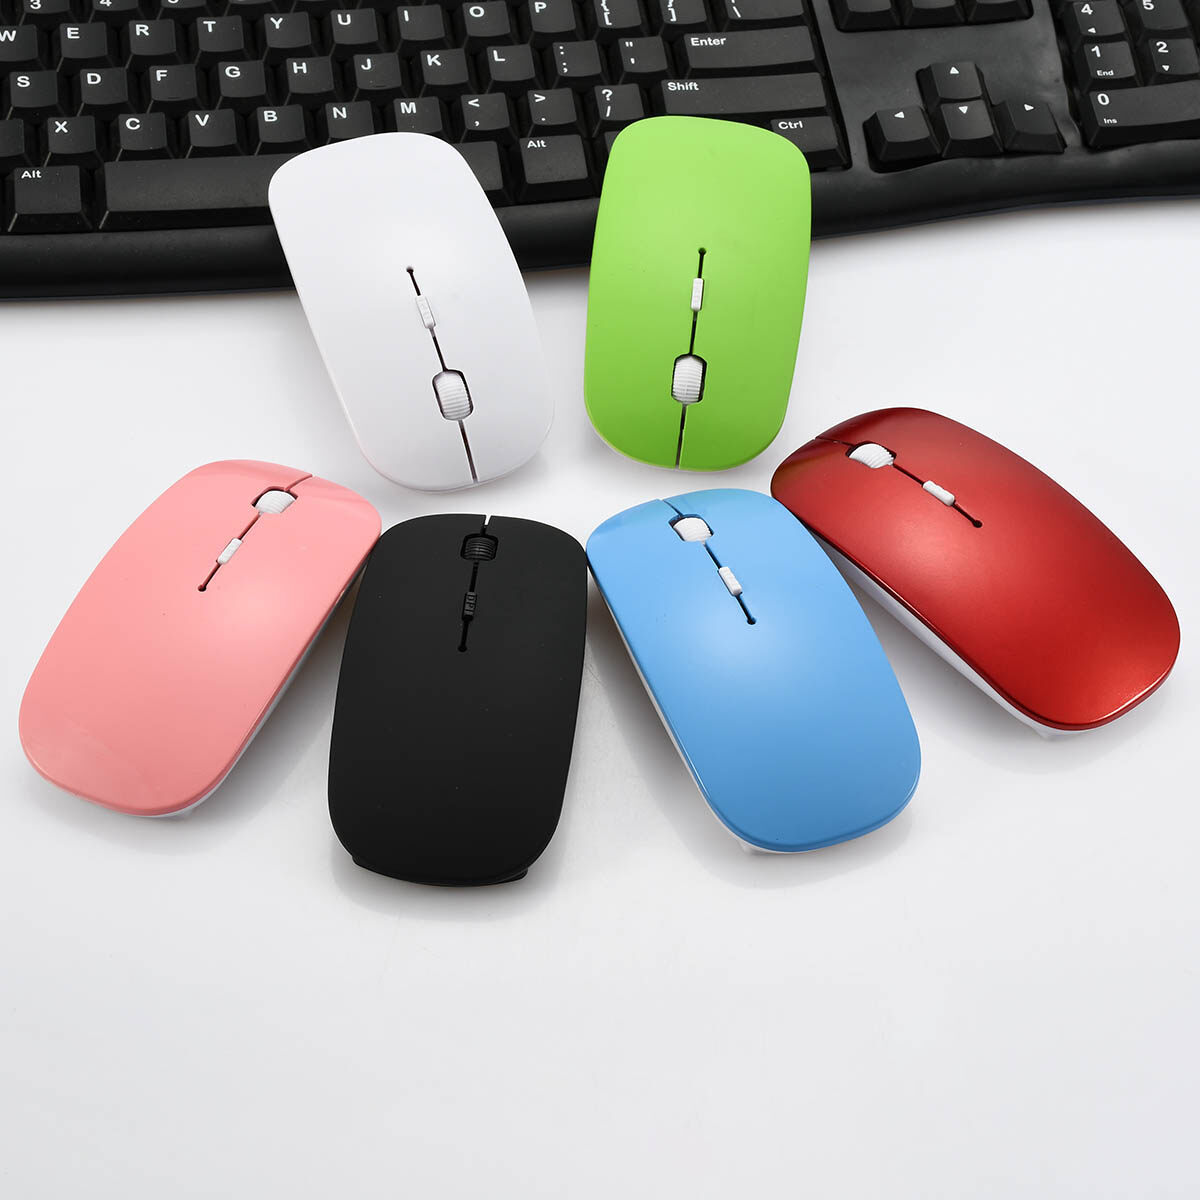 【YIDEA HONGKONG】 Candy Color Ultra Thin USB Optical Wireless Mouse 2.4G Receiver Super Slim Mouse Cordless